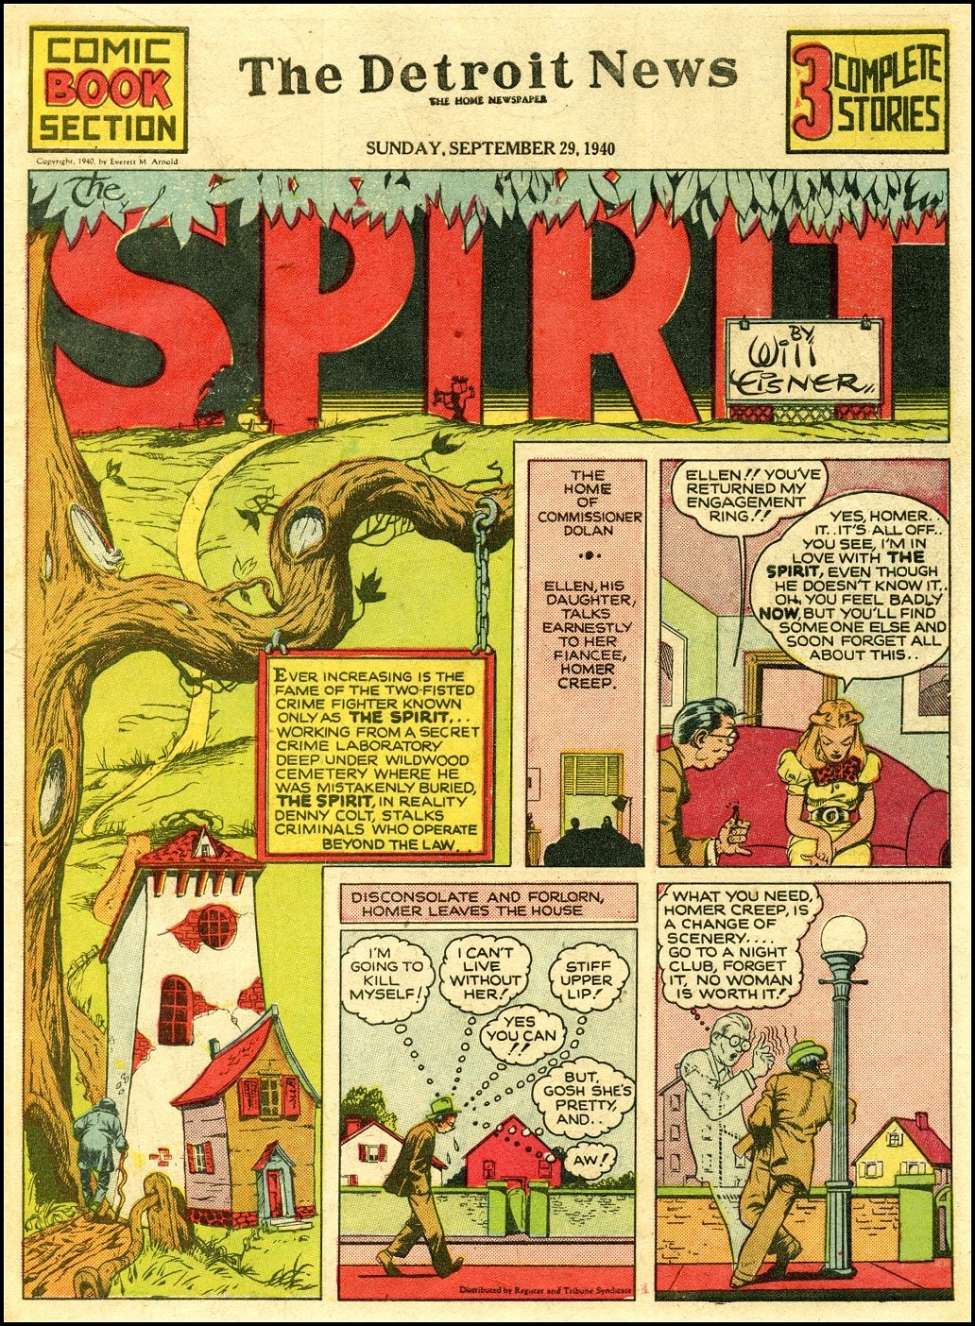 Comic Book Cover For The Spirit (1940-09-29) - Detroit News